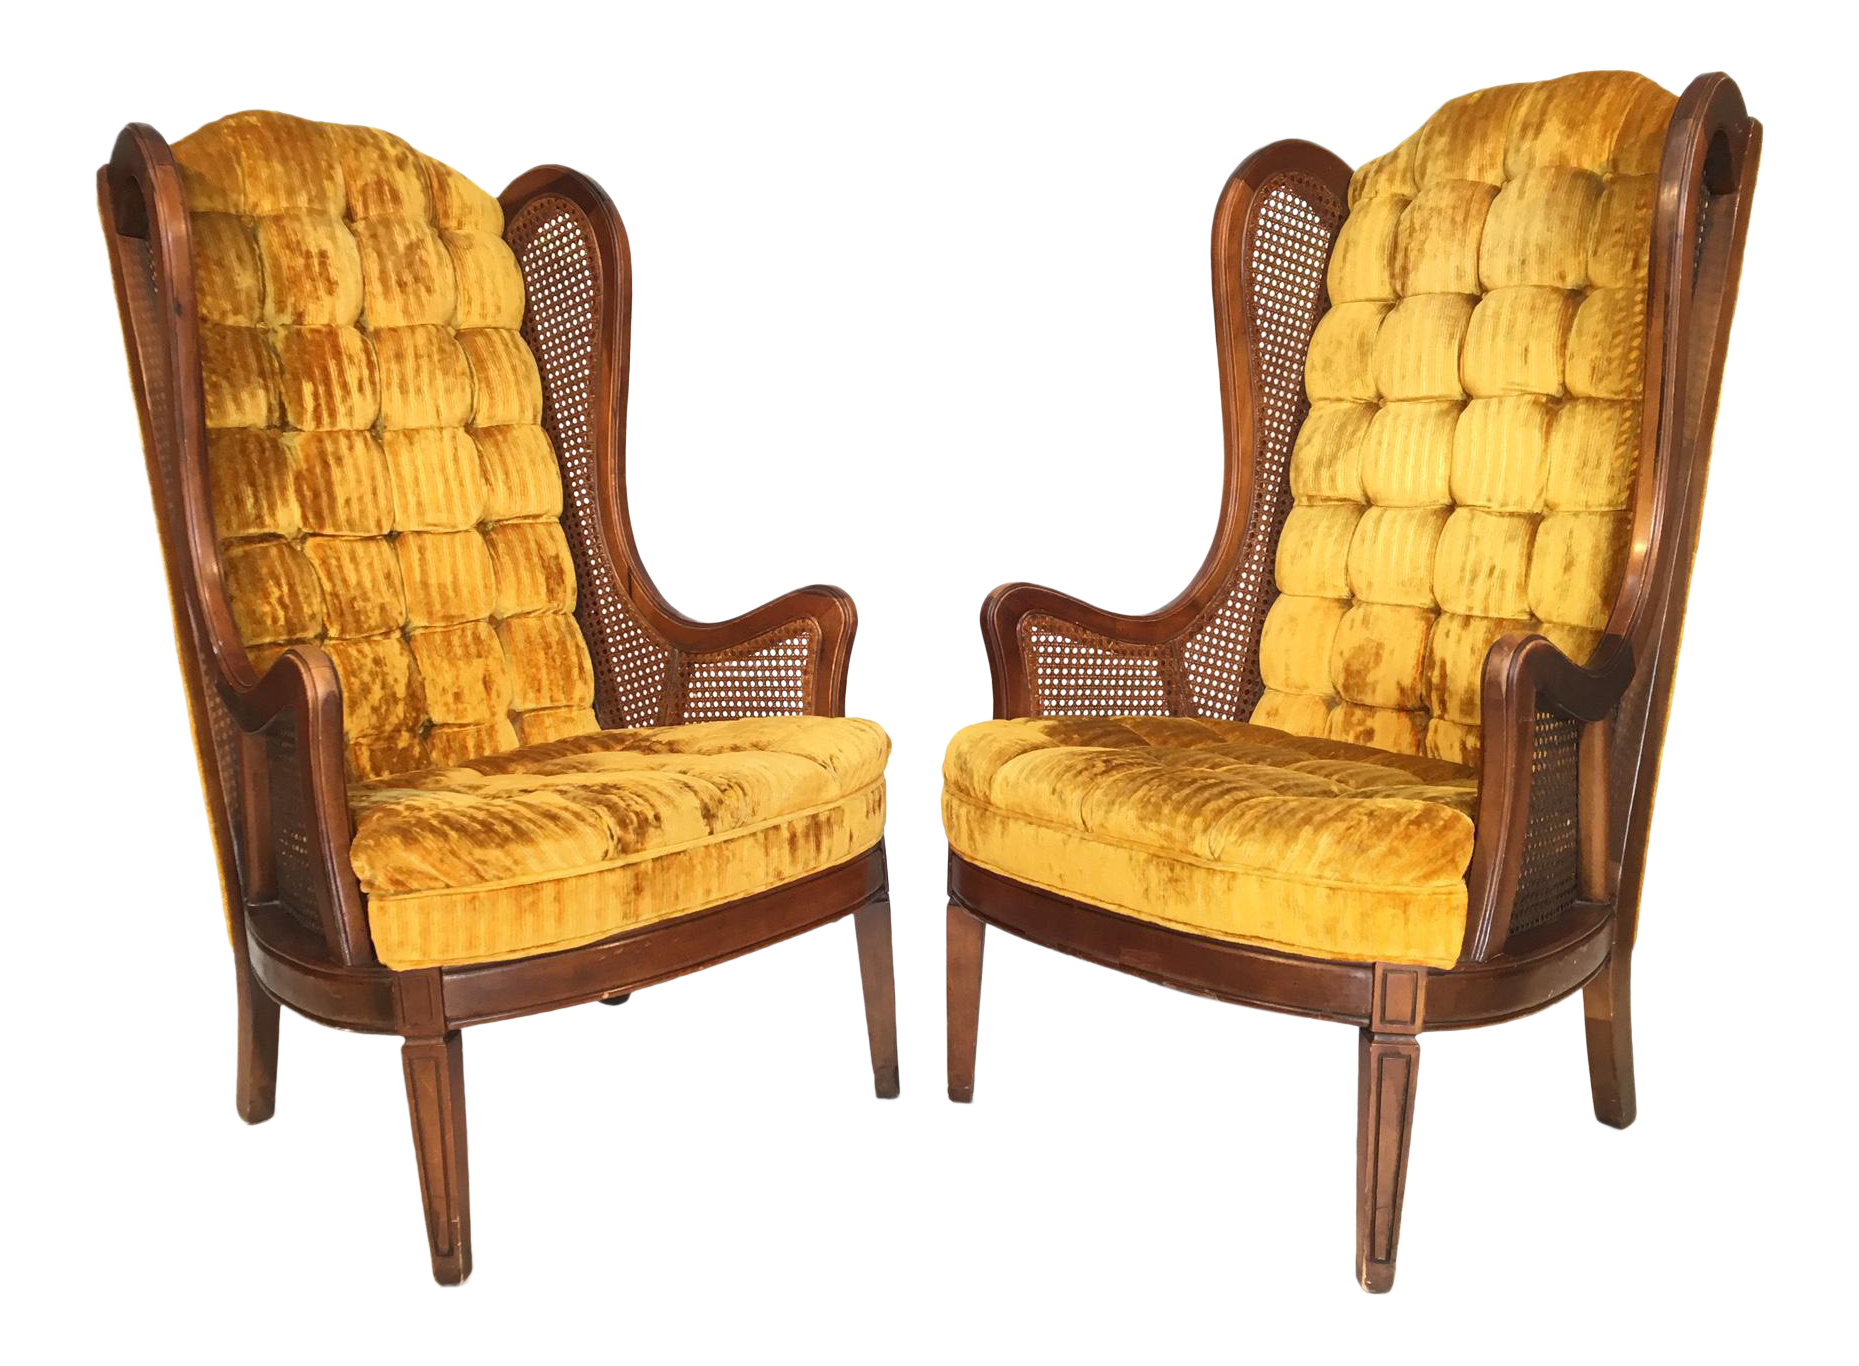 Pair of Tufted Velvet Cane Wingback Chairs by Lewittes